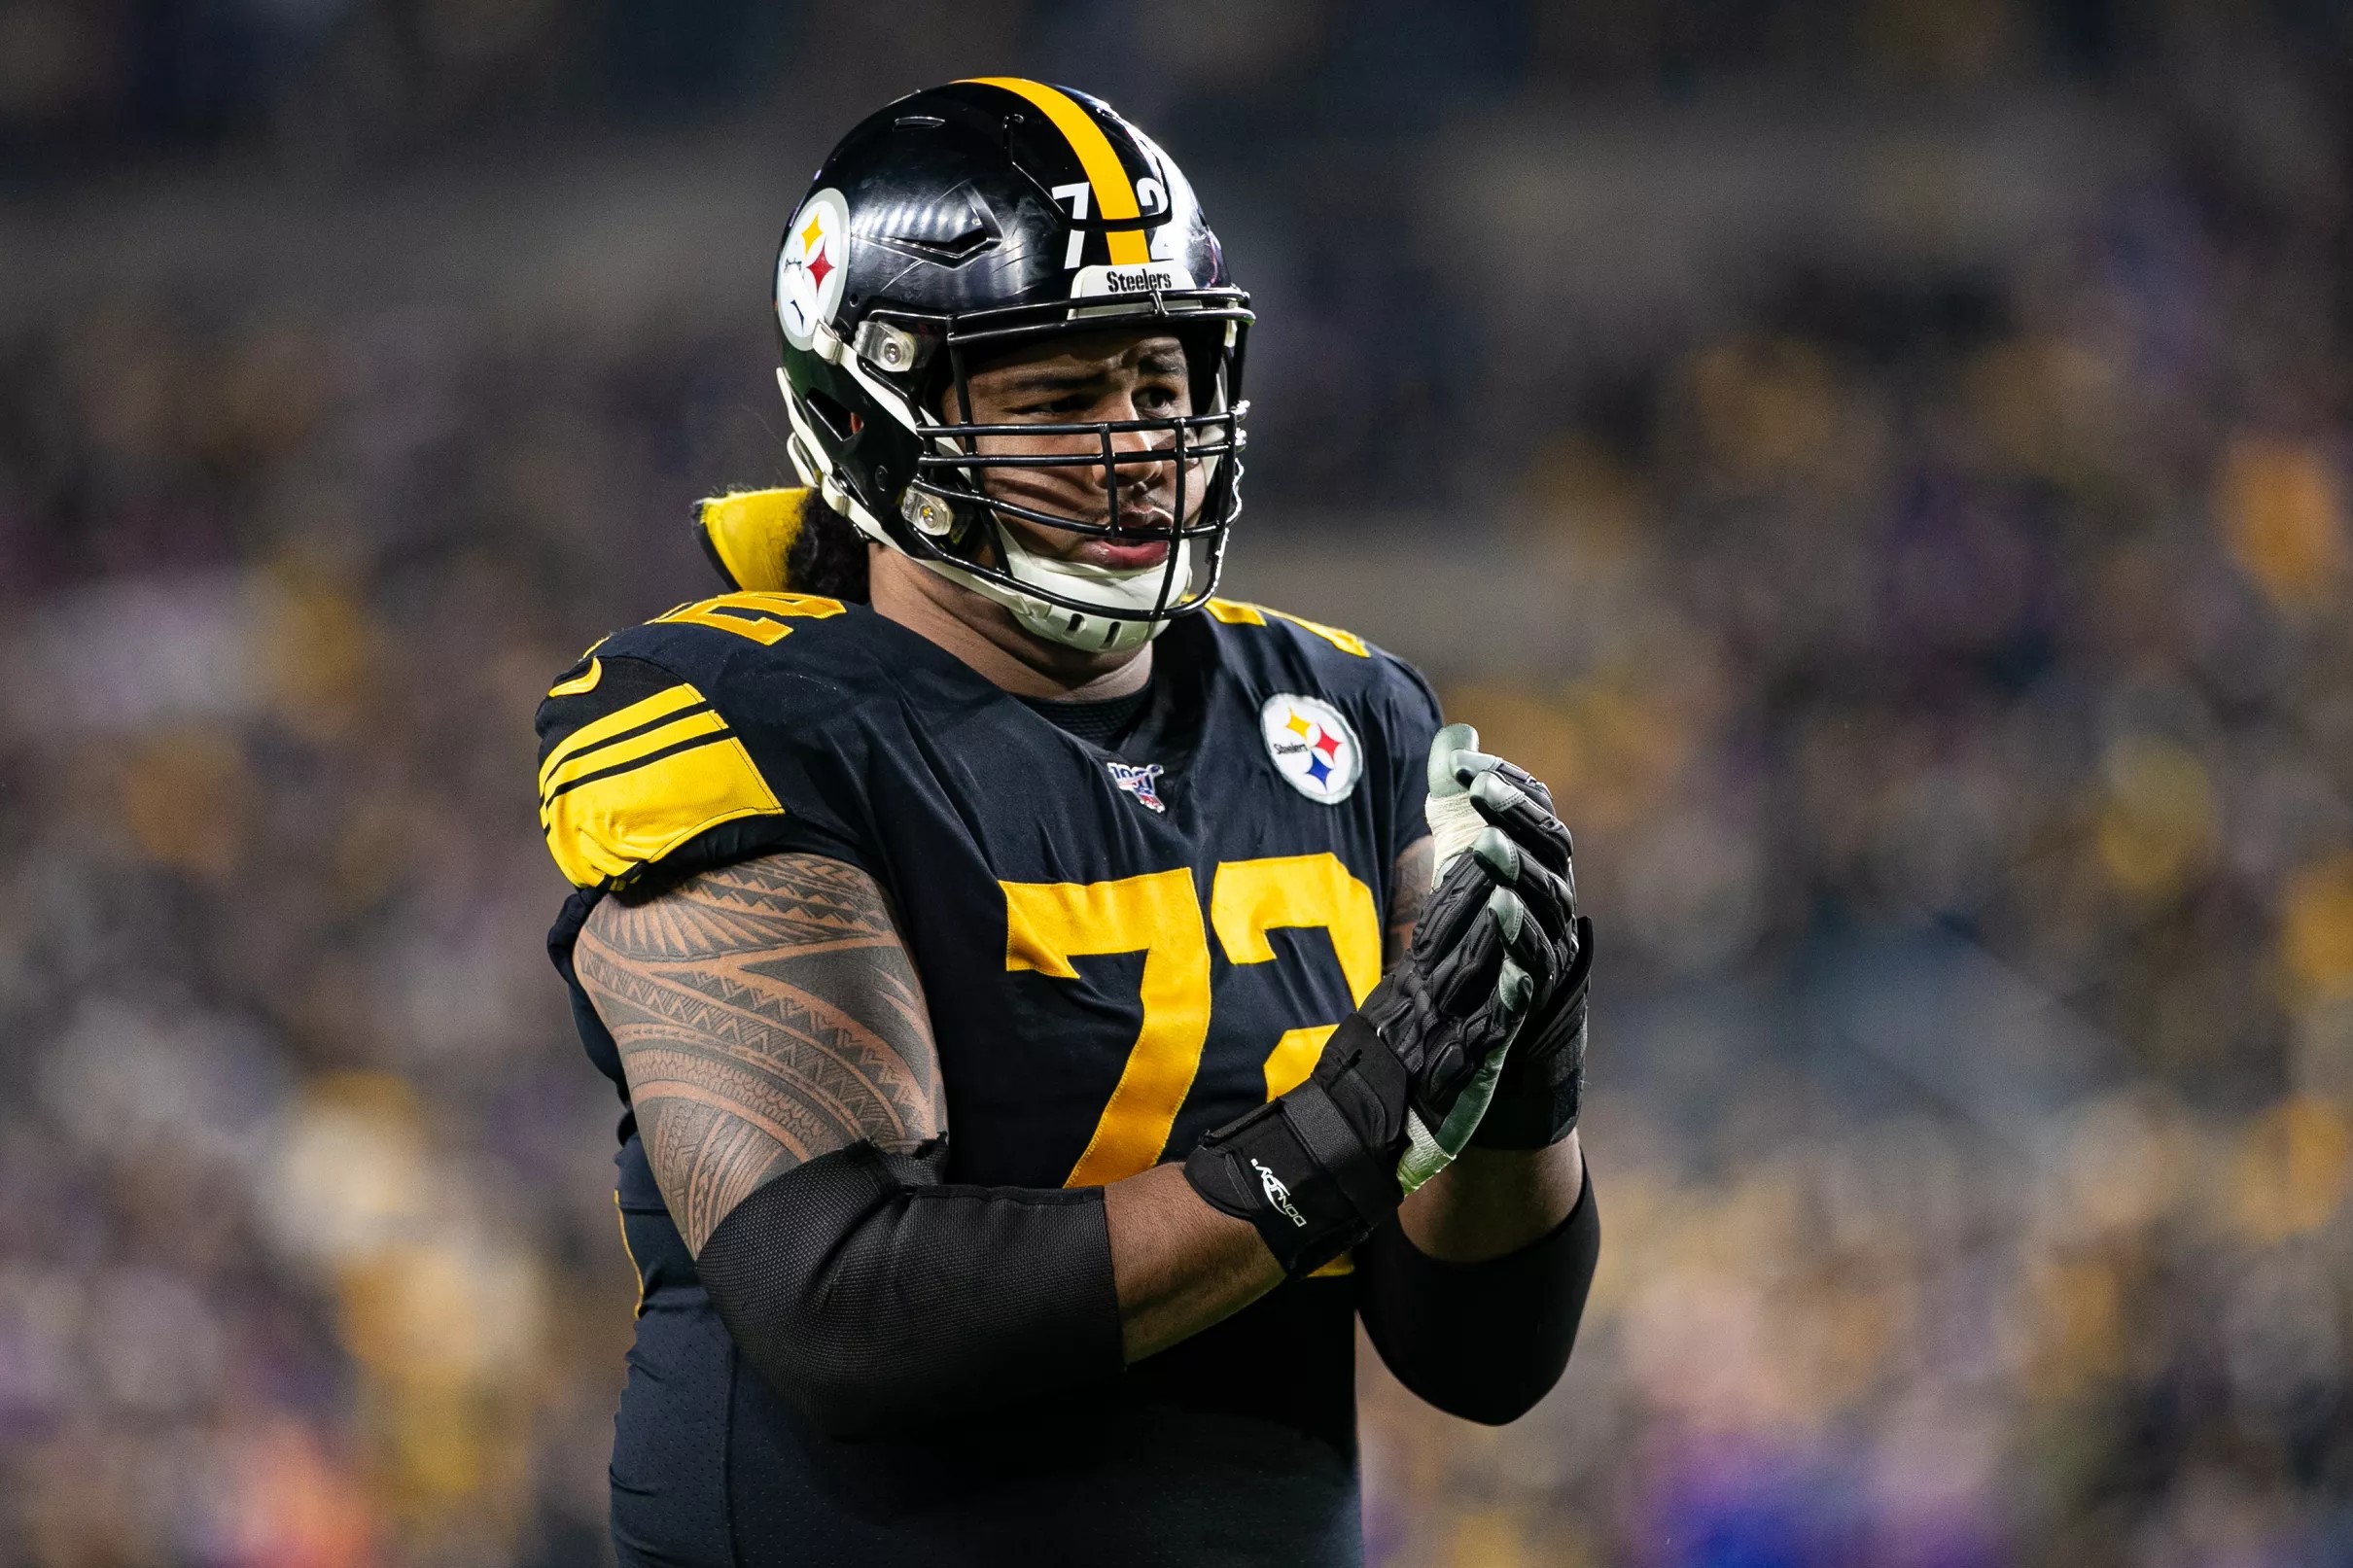 Financial terms of the free agent signings the Steelers made on Tuesday